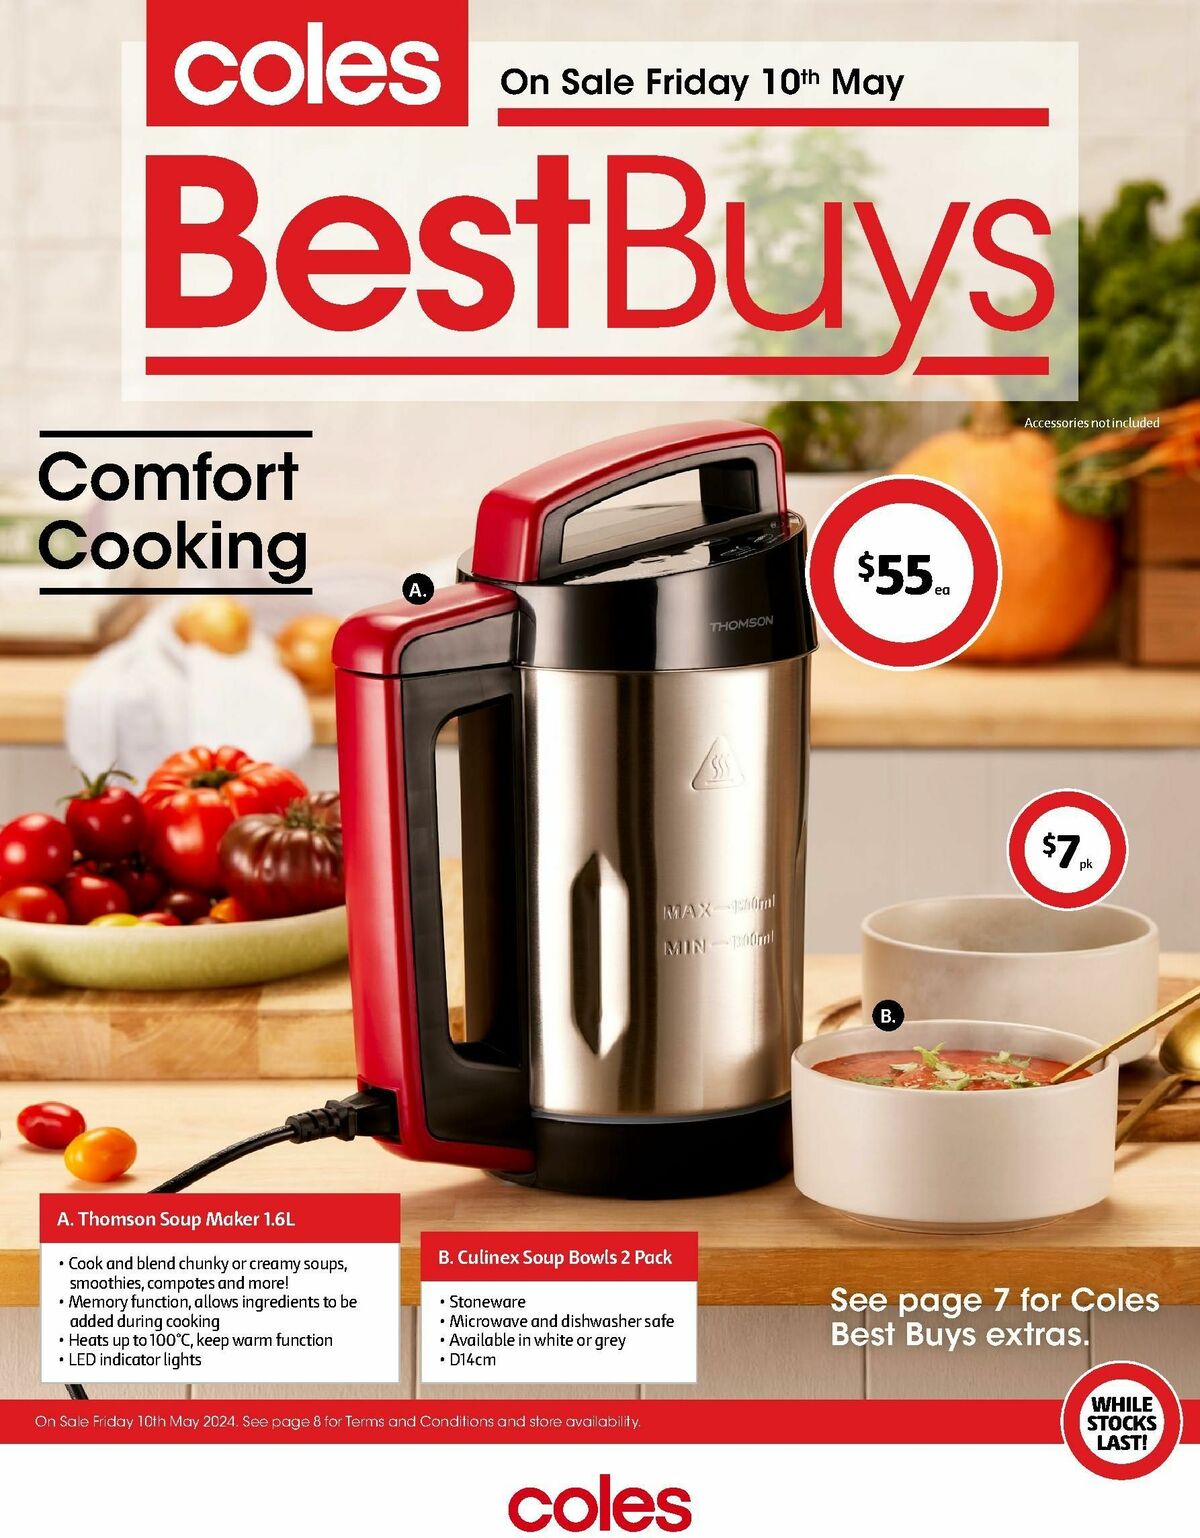 Coles Best Buys - Comfort Cooking Catalogues from 10 May